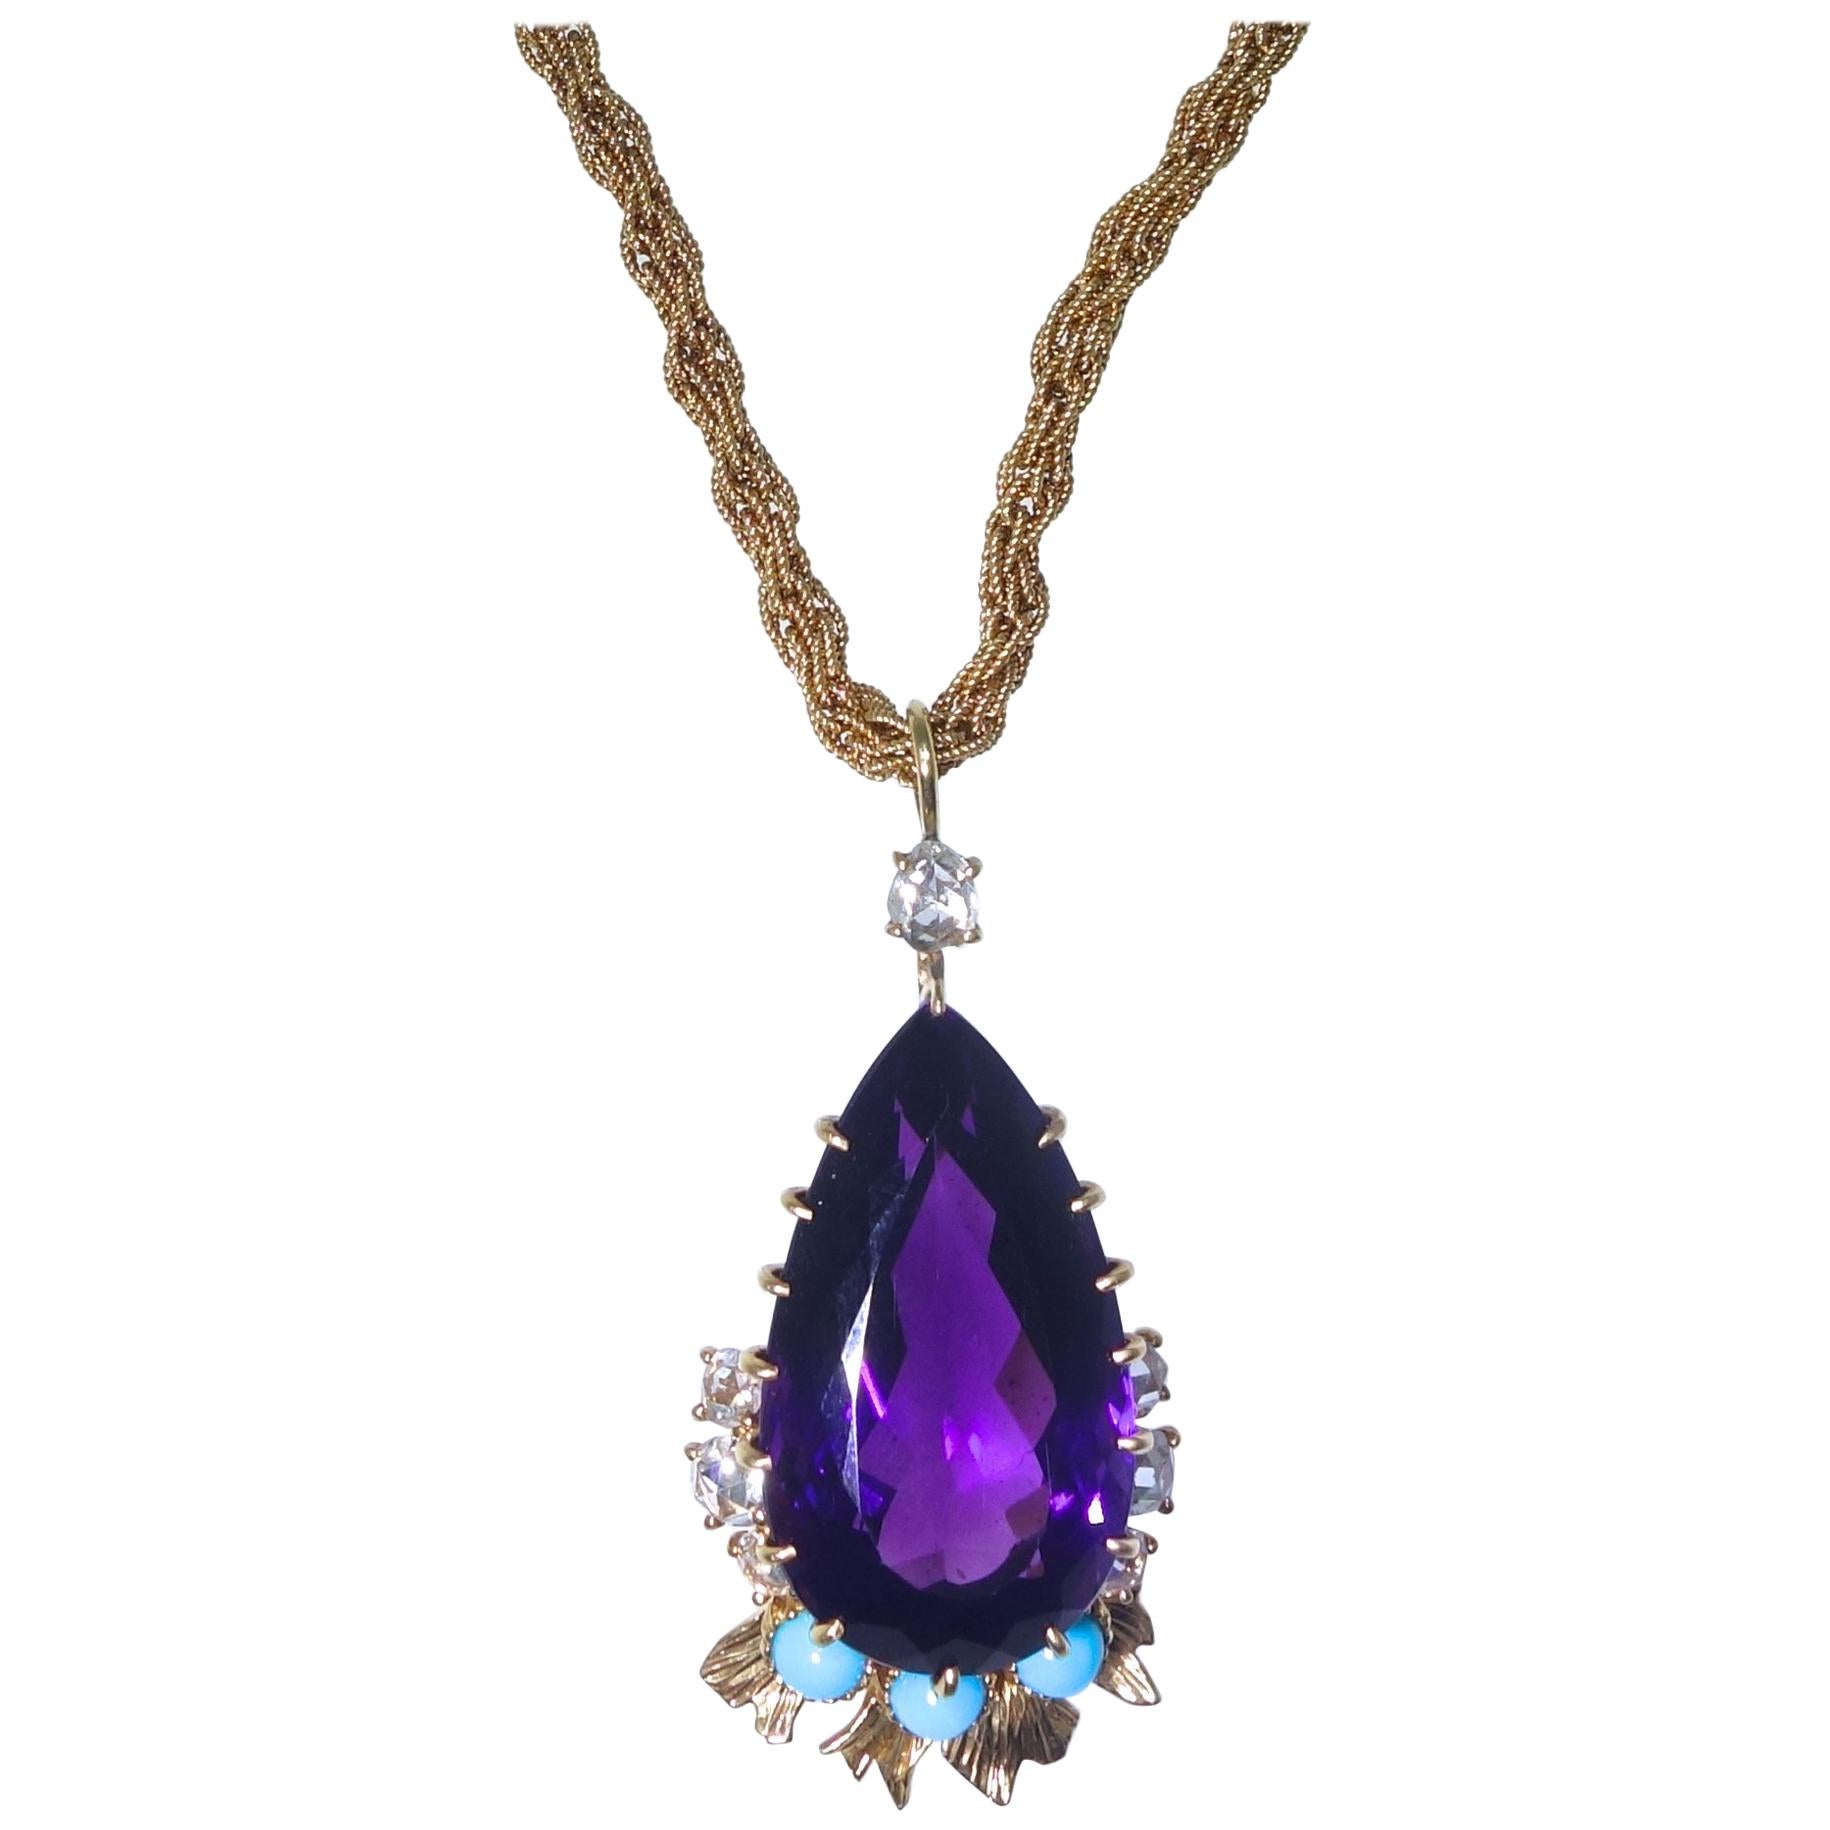 Cartier has set a very fine natural Siberian amethyst as a tear drop, accented with rose cut diamonds and Persian Turquoise from a Cartier 18K gold chain.  This center stone which has wonderful flashes of red - a hallmark of fine amethysts from